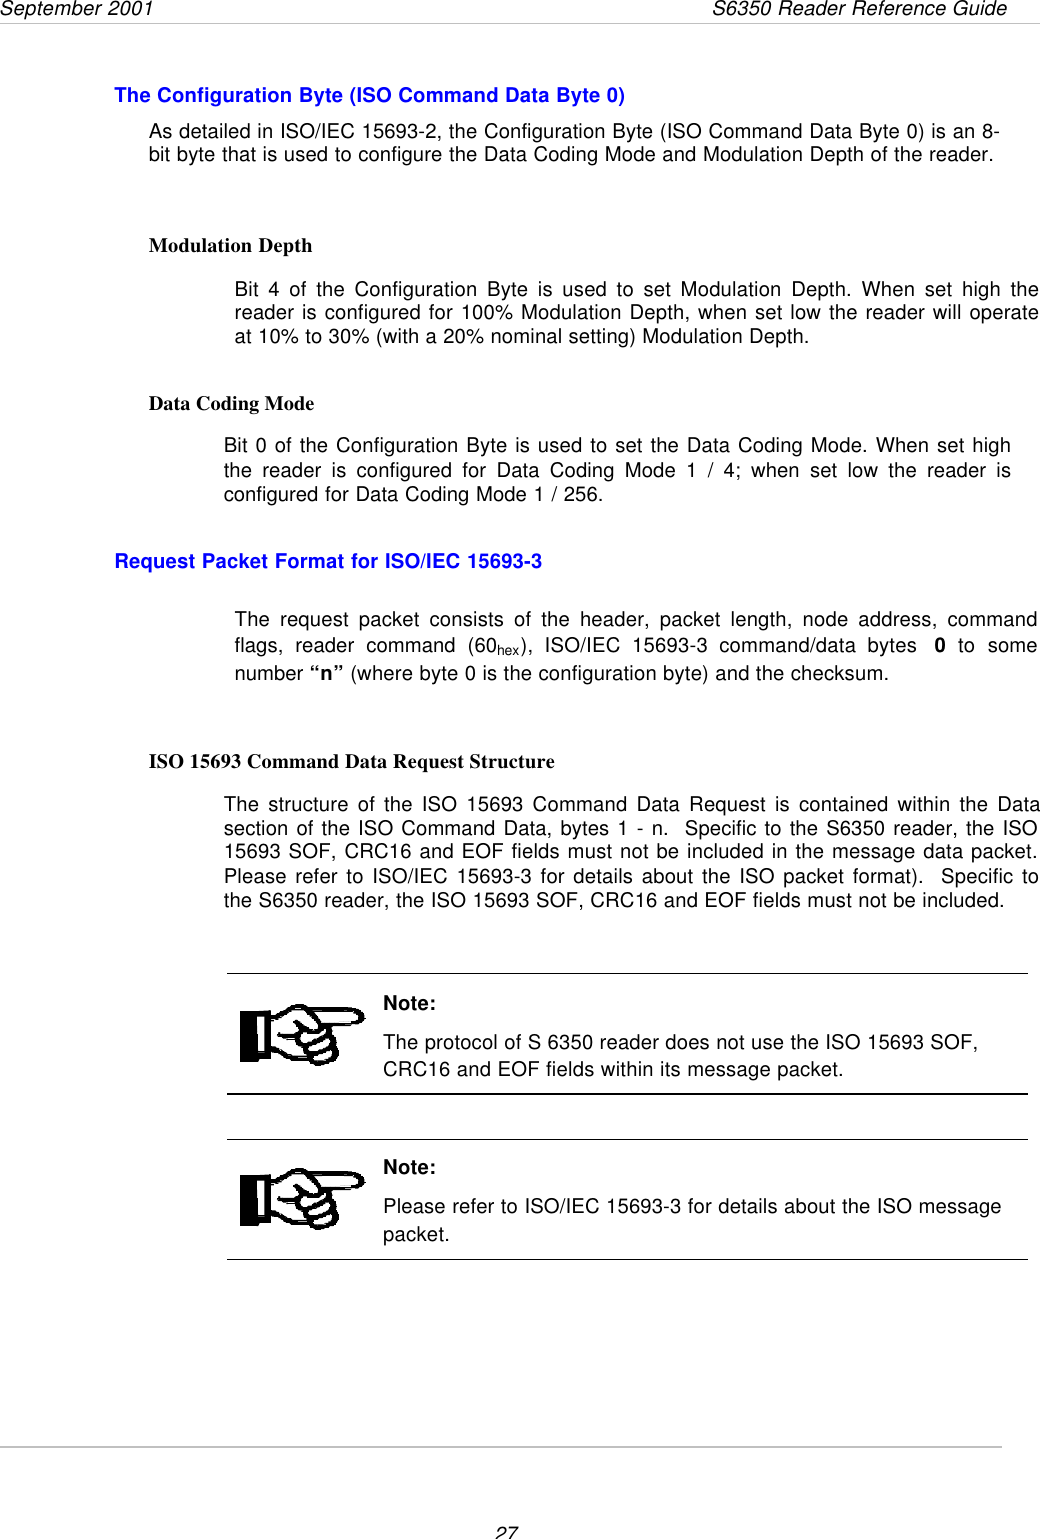 September 2001       S6350 Reader Reference Guide27The Configuration Byte (ISO Command Data Byte 0)As detailed in ISO/IEC 15693-2, the Configuration Byte (ISO Command Data Byte 0) is an 8-bit byte that is used to configure the Data Coding Mode and Modulation Depth of the reader.Modulation DepthBit 4 of the Configuration Byte is used to set Modulation Depth. When set high thereader is configured for 100% Modulation Depth, when set low the reader will operateat 10% to 30% (with a 20% nominal setting) Modulation Depth.Data Coding ModeBit 0 of the Configuration Byte is used to set the Data Coding Mode. When set highthe reader is configured for Data Coding Mode 1 / 4; when set low the reader isconfigured for Data Coding Mode 1 / 256.Request Packet Format for ISO/IEC 15693-3The request packet consists of the header, packet length, node address, commandflags, reader command (60hex), ISO/IEC 15693-3 command/data bytes  0 to somenumber “n” (where byte 0 is the configuration byte) and the checksum.ISO 15693 Command Data Request StructureThe structure of the ISO 15693 Command Data Request is contained within the Datasection of the ISO Command Data, bytes 1 - n.  Specific to the S6350 reader, the ISO15693 SOF, CRC16 and EOF fields must not be included in the message data packet.Please refer to ISO/IEC 15693-3 for details about the ISO packet format).  Specific tothe S6350 reader, the ISO 15693 SOF, CRC16 and EOF fields must not be included.Note:The protocol of S 6350 reader does not use the ISO 15693 SOF,CRC16 and EOF fields within its message packet.Note:Please refer to ISO/IEC 15693-3 for details about the ISO messagepacket.